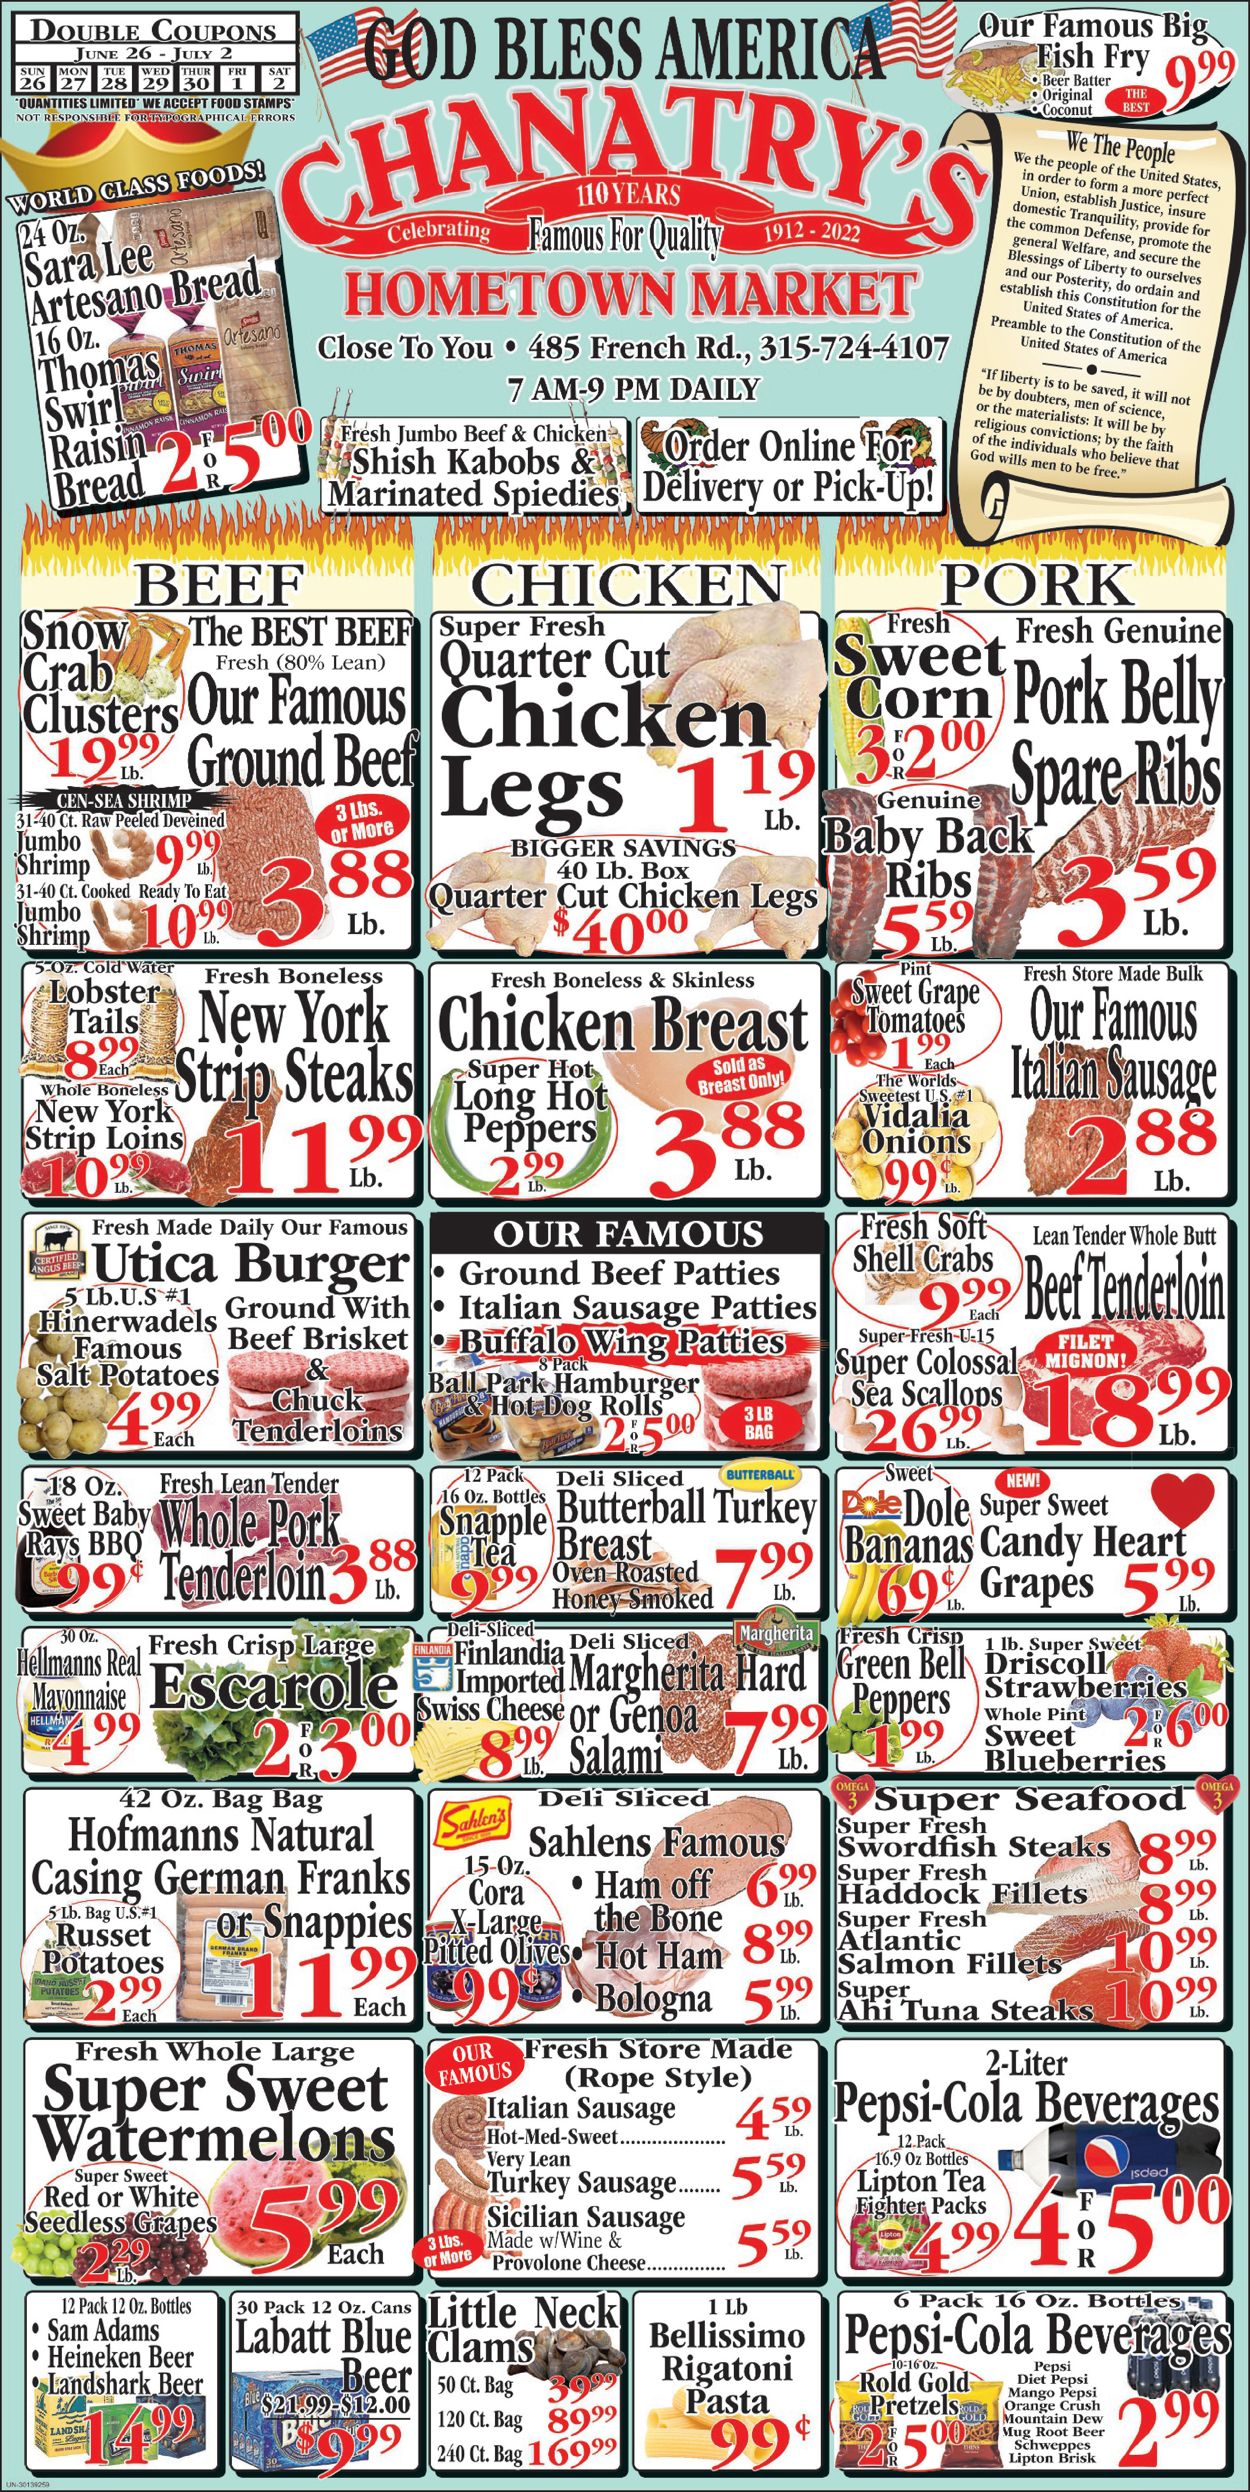 Chanatry's Hometown Market Ad from 06/26/2022